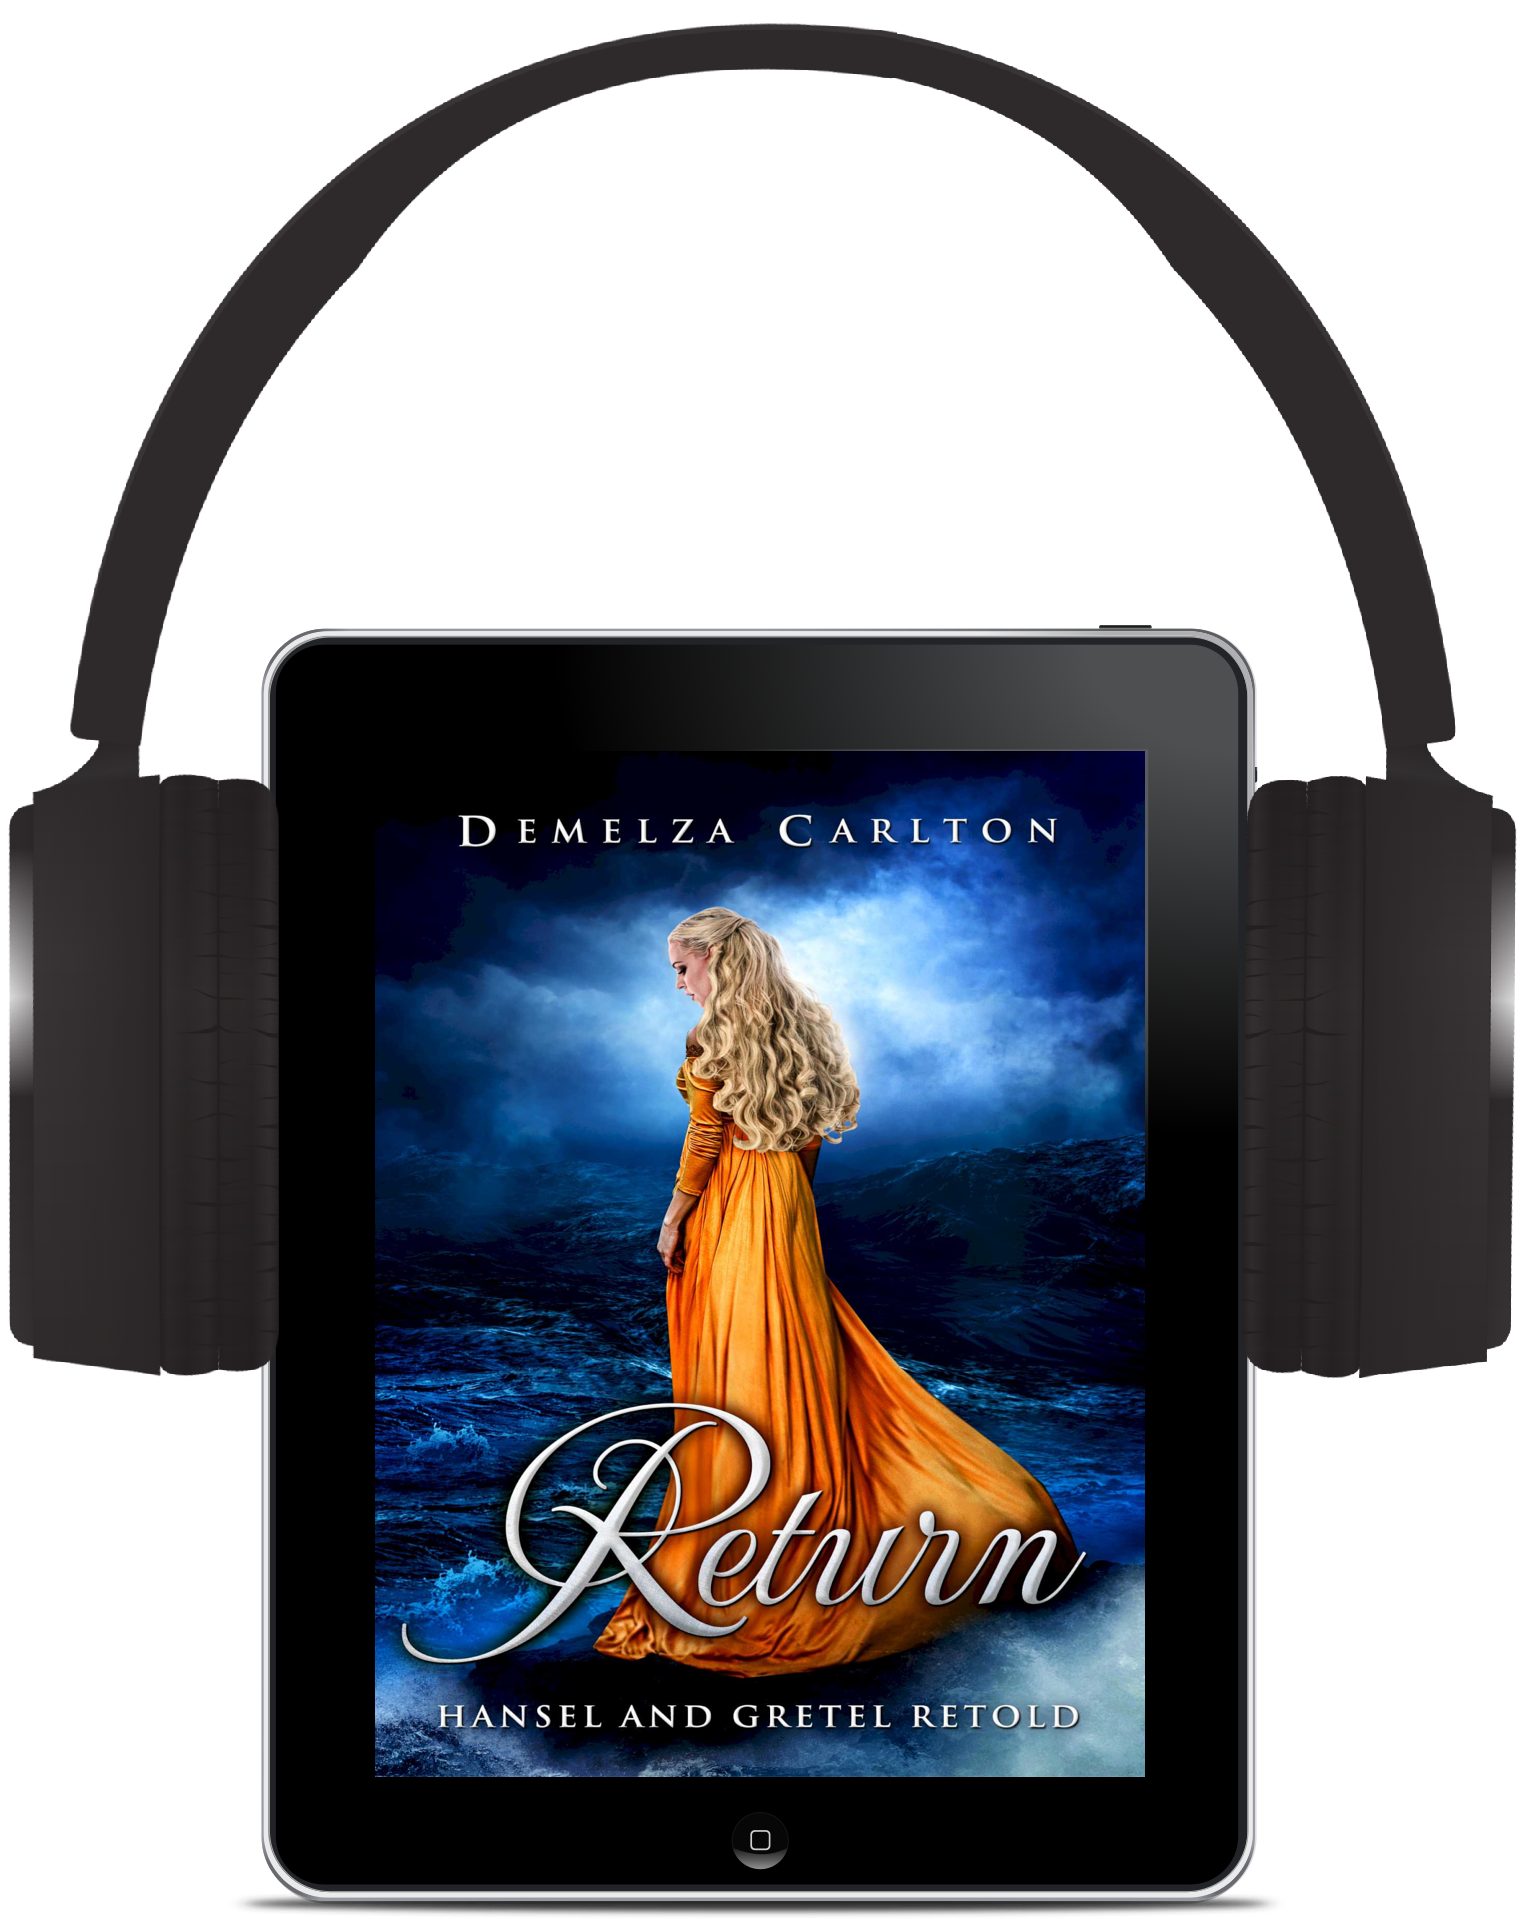 Return: Hansel and Gretel Retold (Book 10 in the Romance a Medieval Fairytale series) AUDIOBOOK